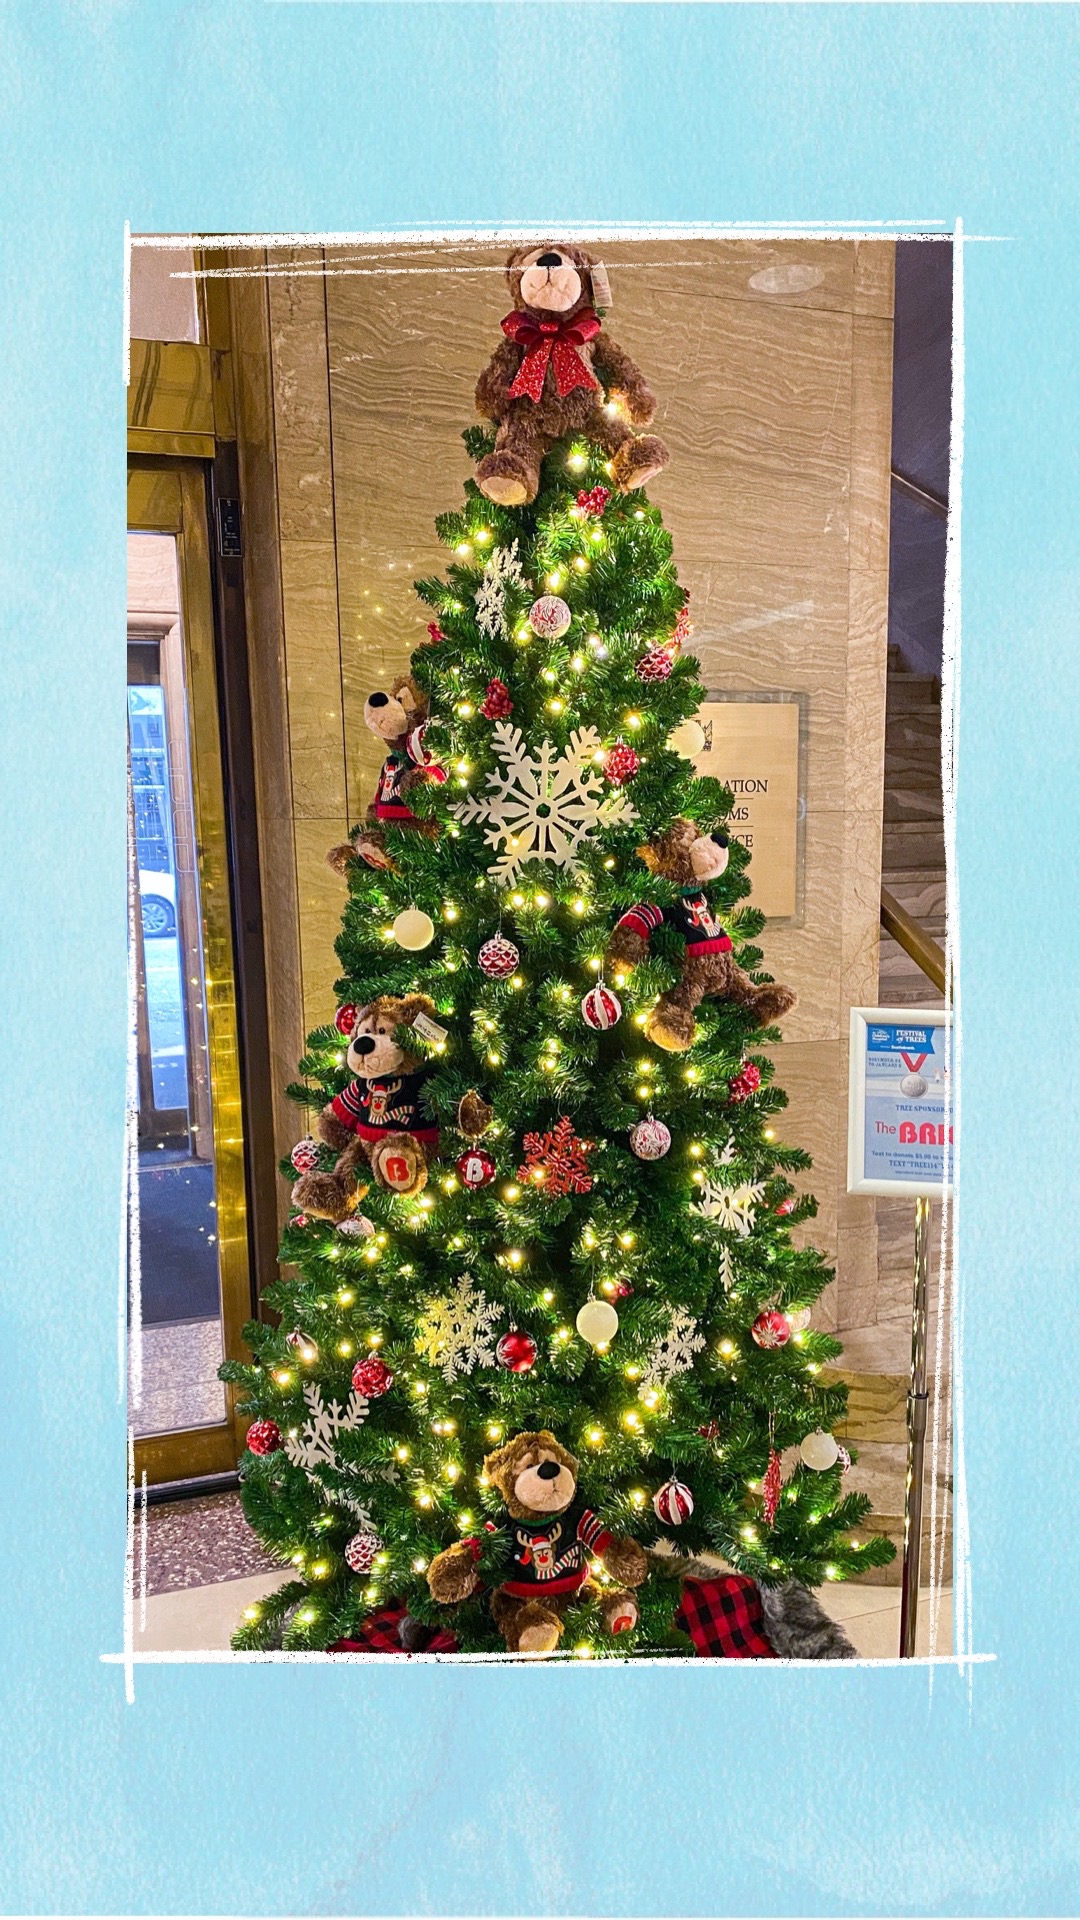 A holiday tree decorated with red and white ornaments and teddy bears for the BCCHF Festival of Trees